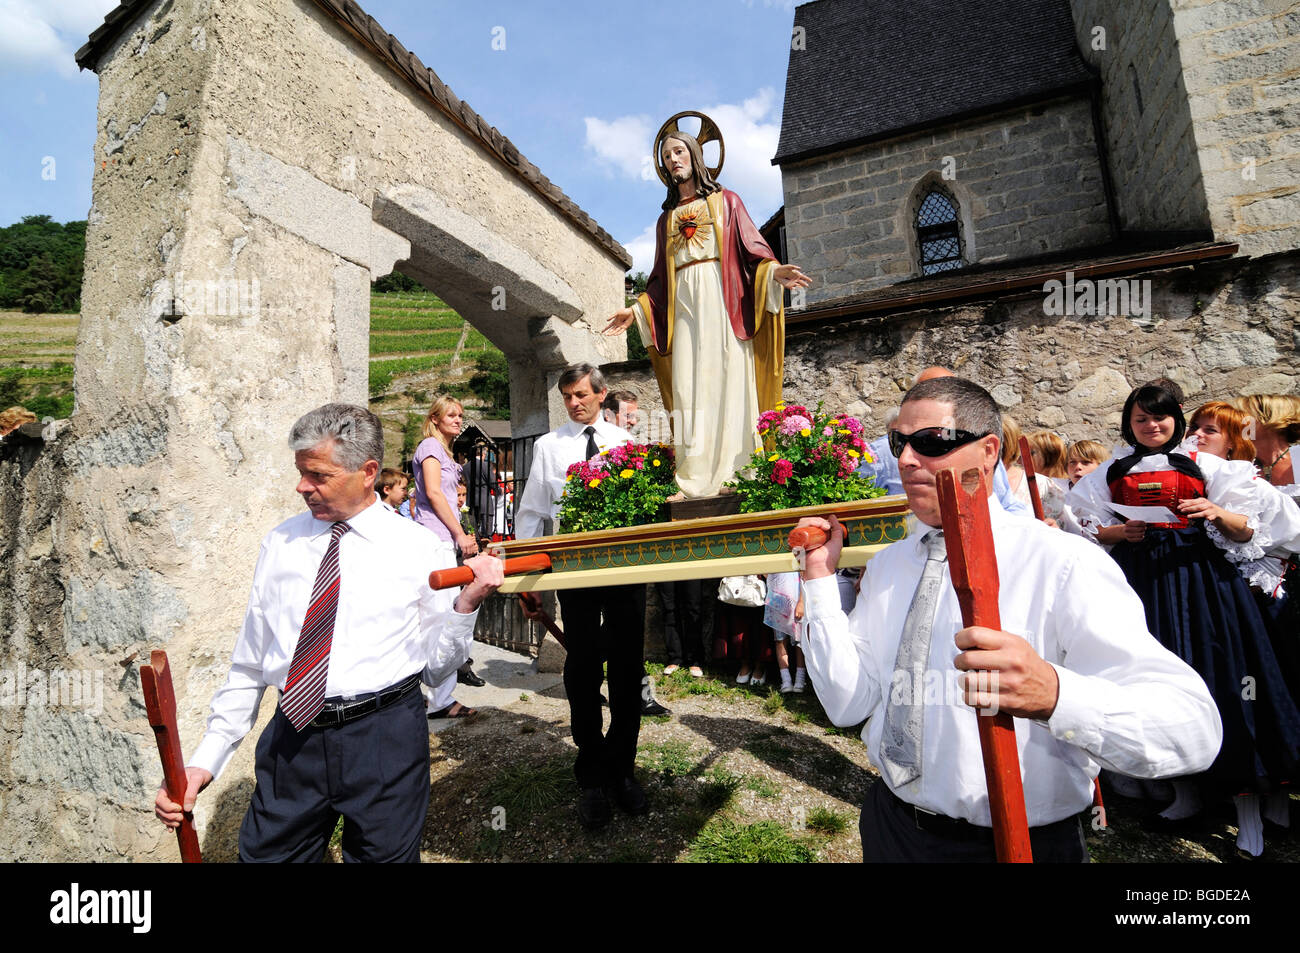 Herz-Jesu-Prozession, Sacred Heart Procession in Feldthurns, Brixen, South Tyrol, Italy, Europe Stock Photo